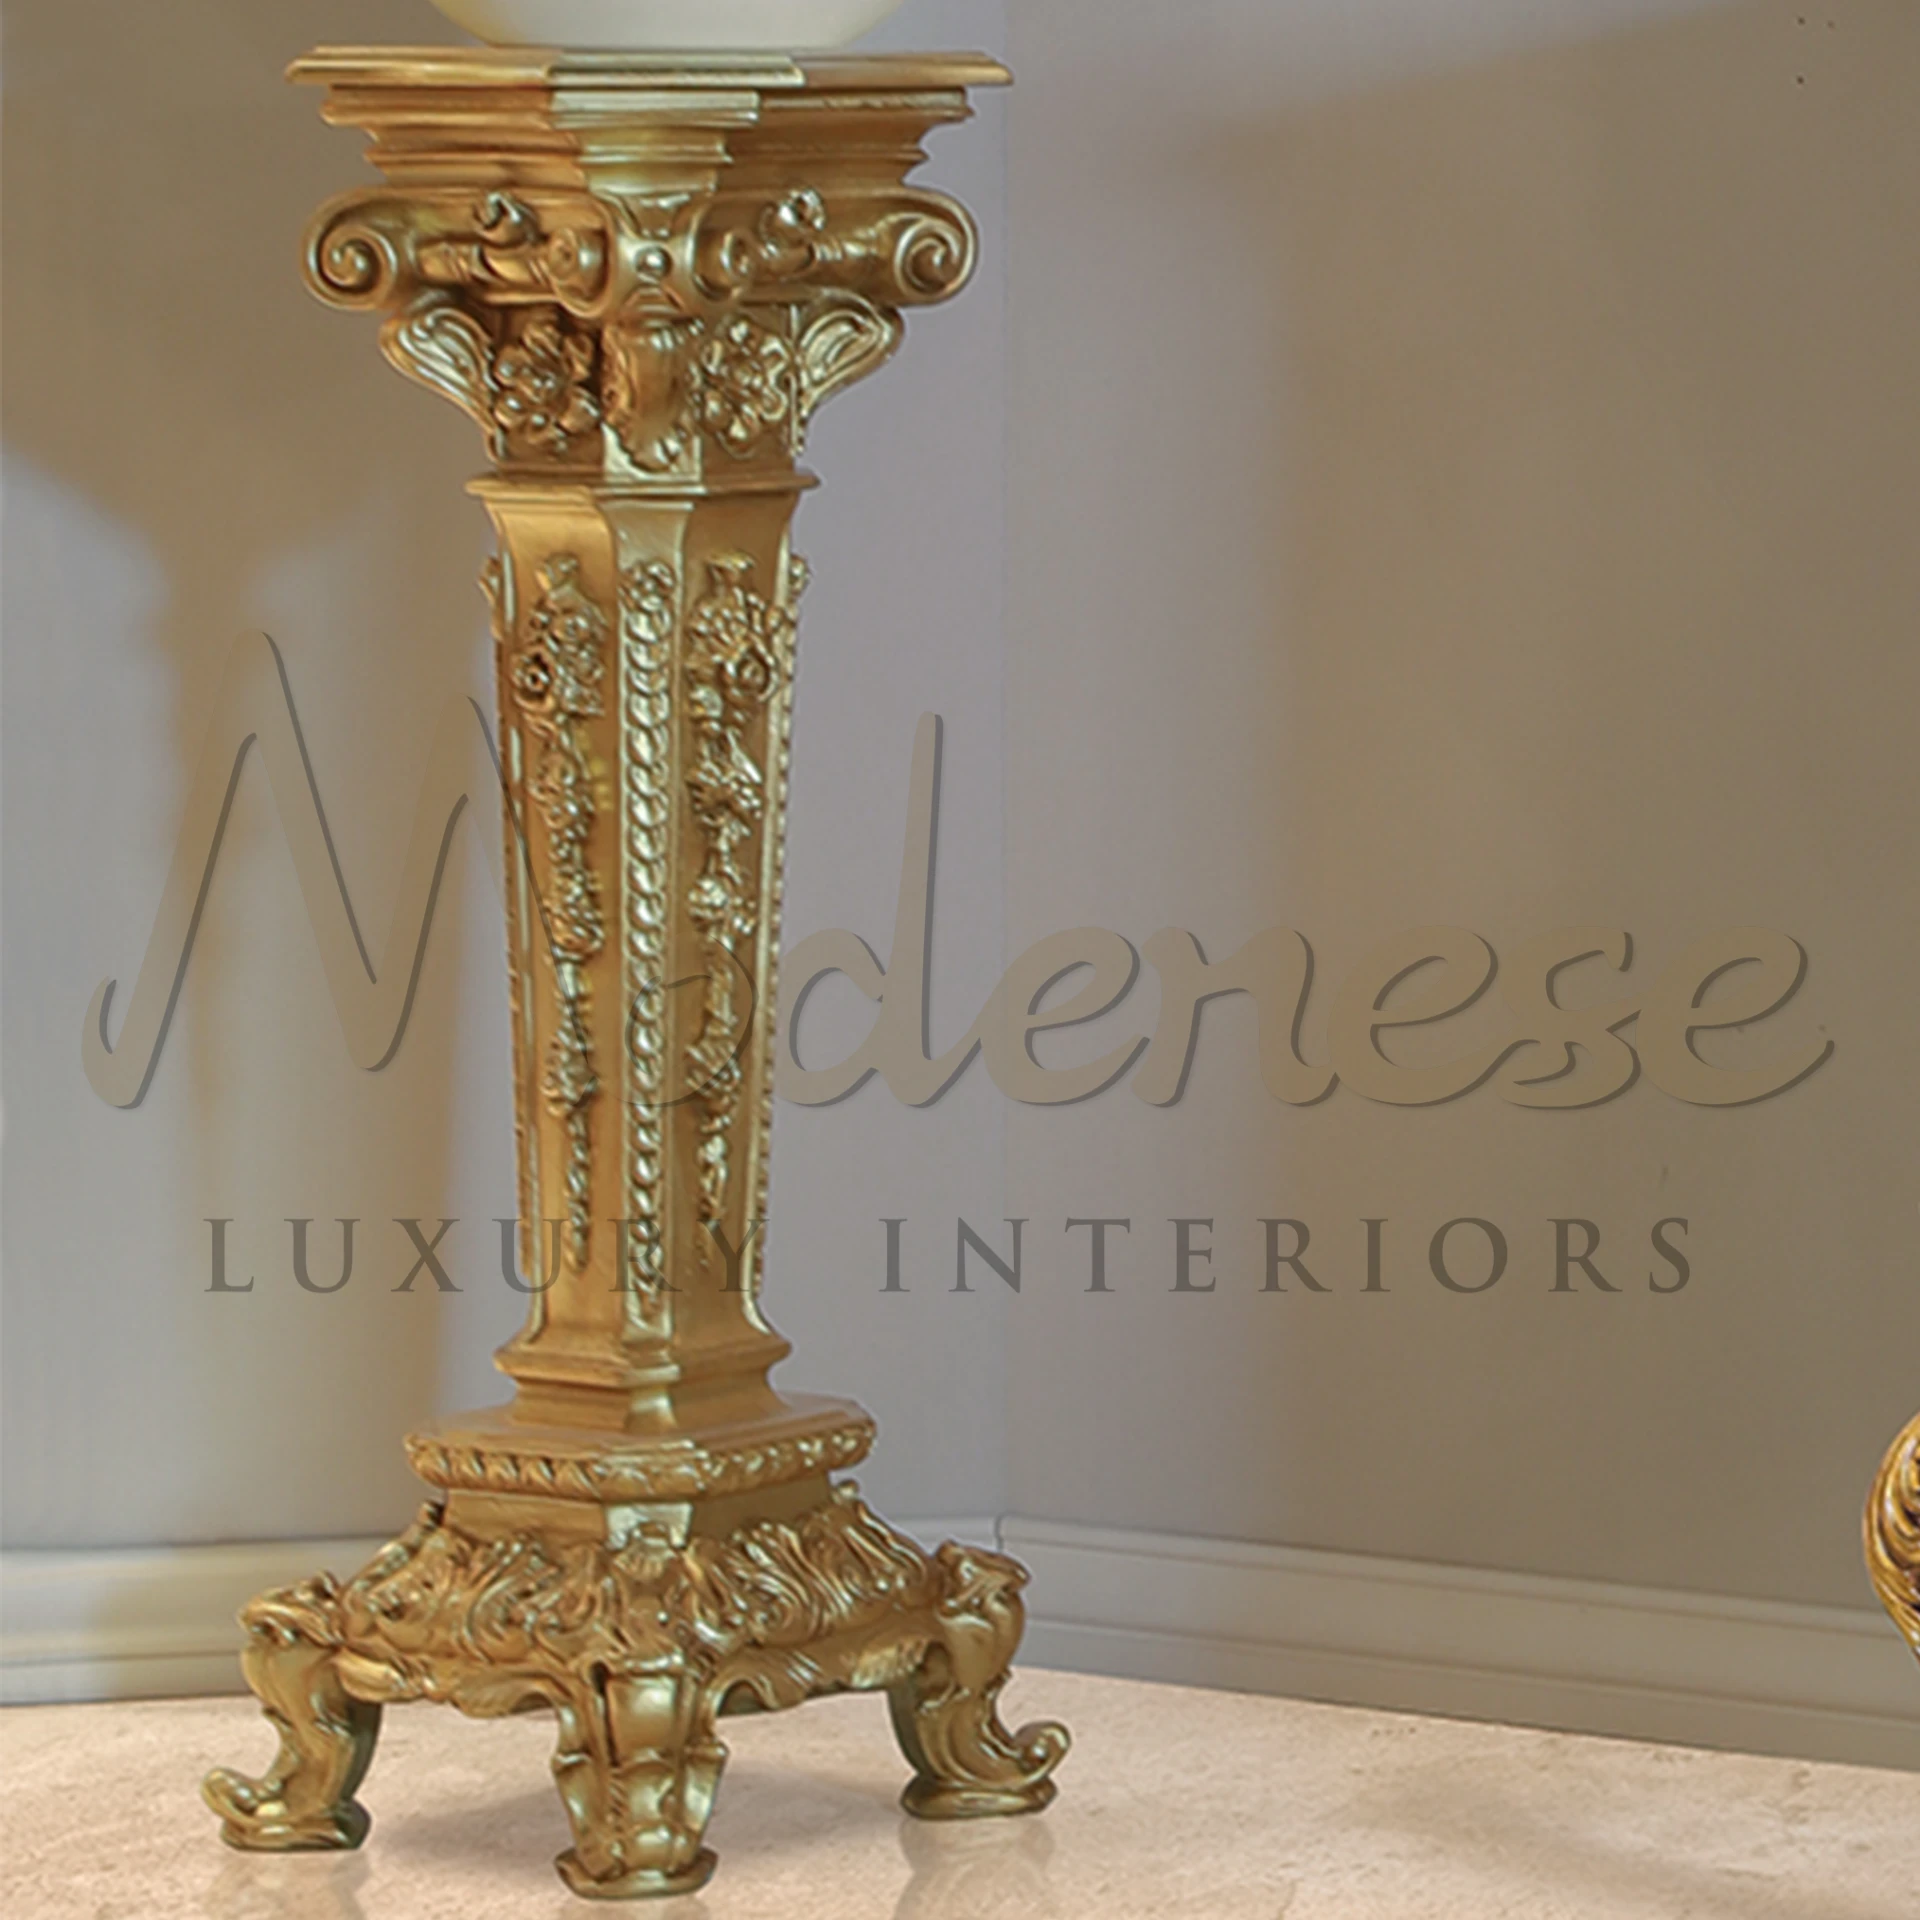 Handmade elegance in this baroque style vase stand, offering an opulent touch to any decor project.